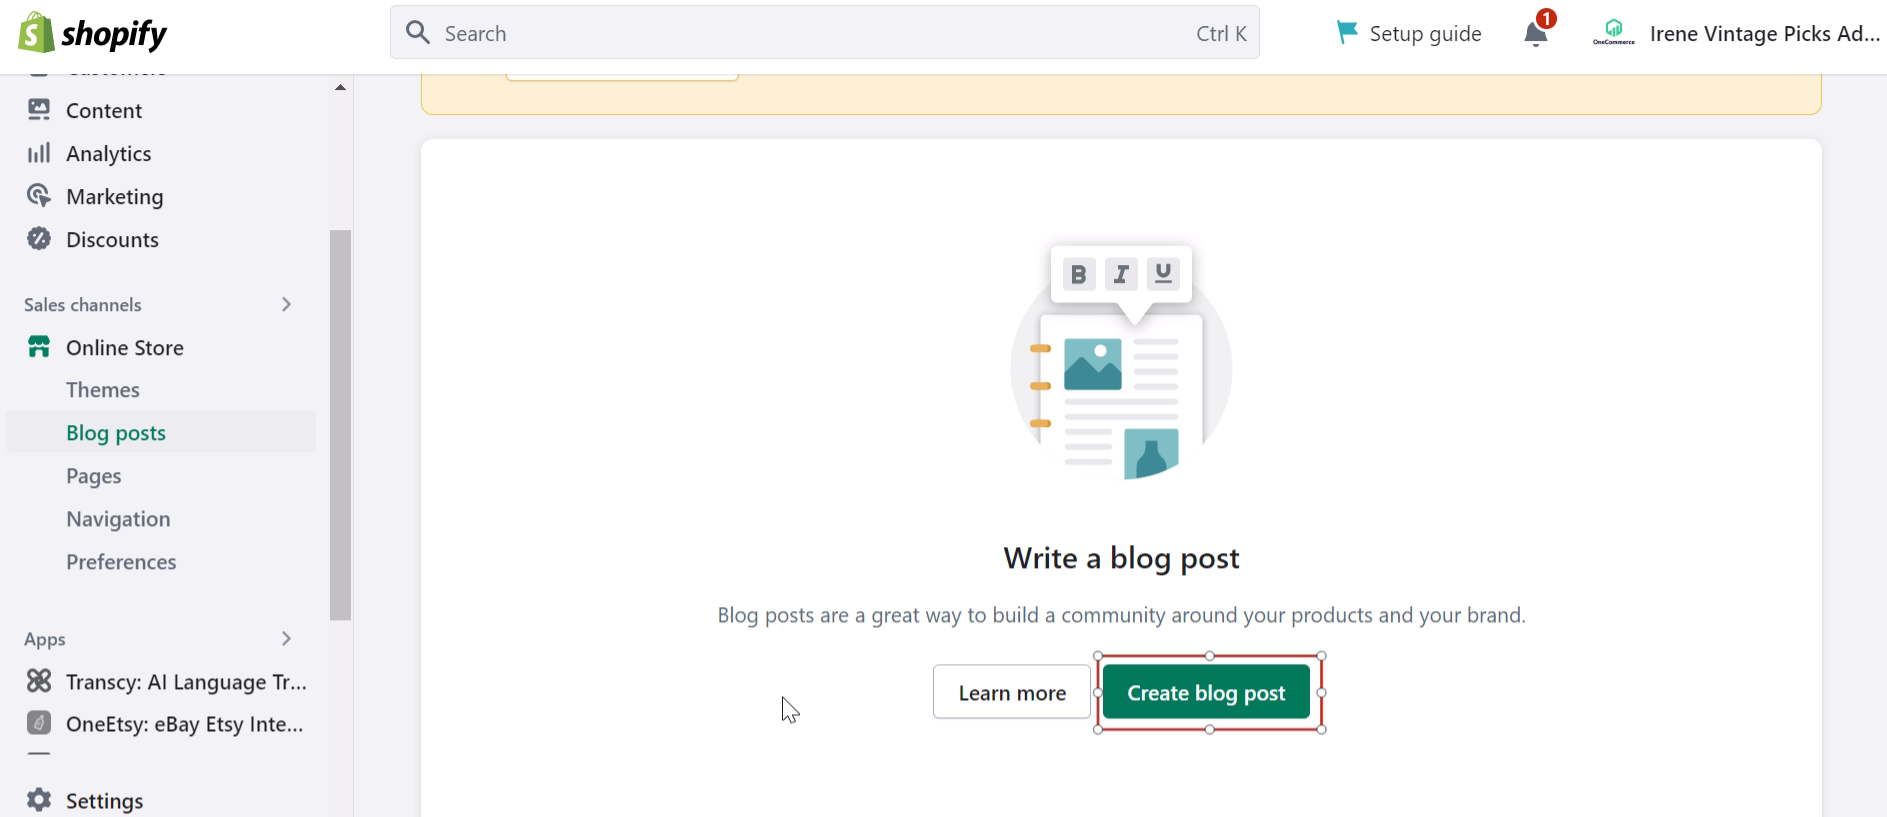 Go to Blog posts and choose Create blog post